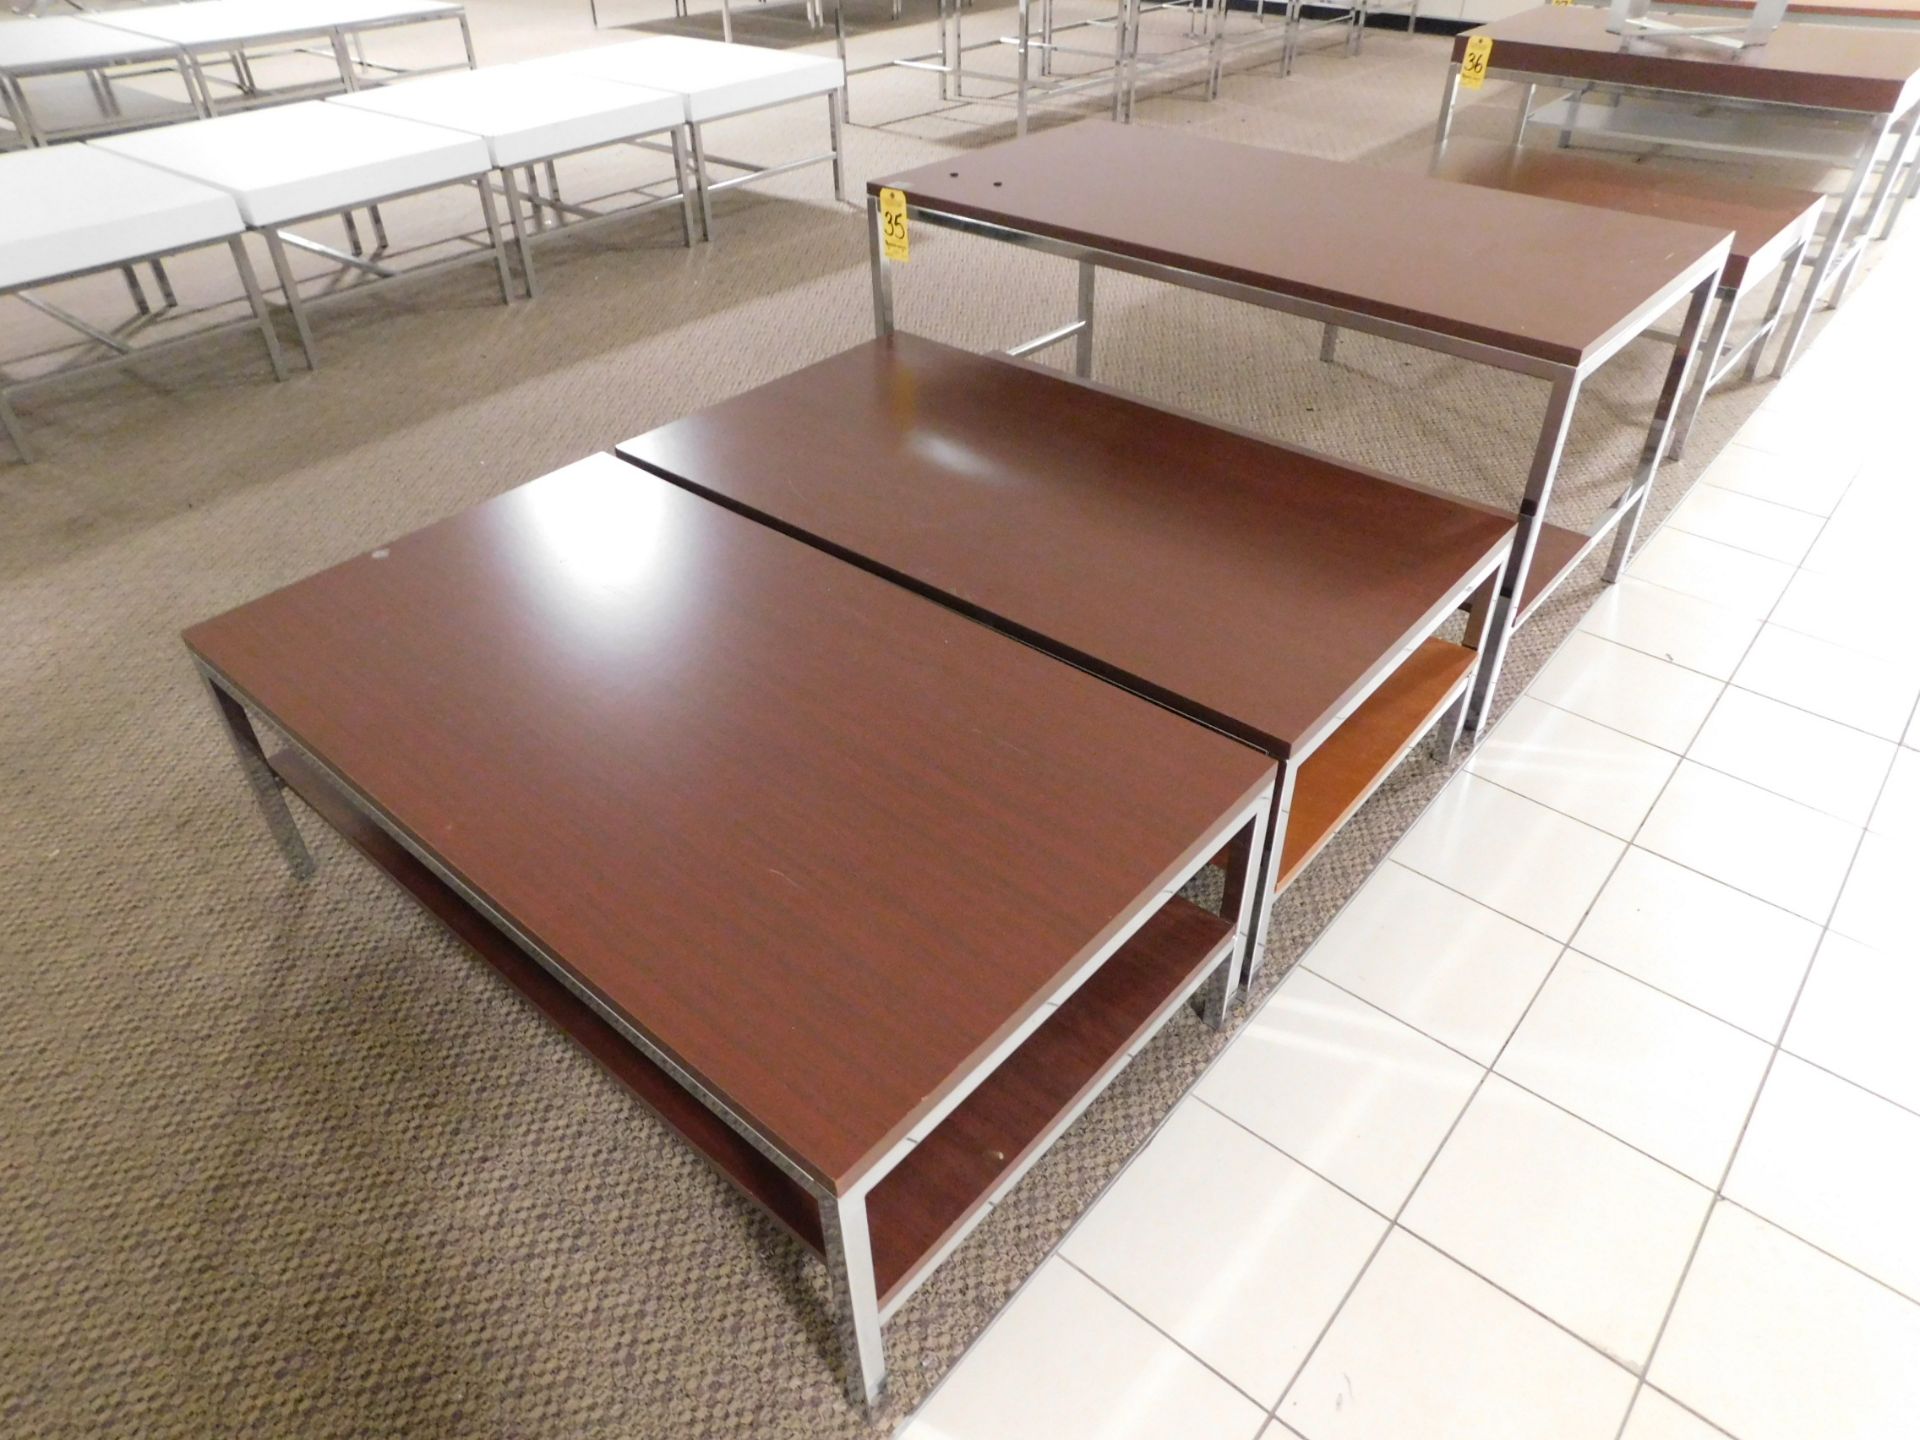 Tables, (1) 32" x 60" x 30" H, and (2) 30" x 54" x 19" H